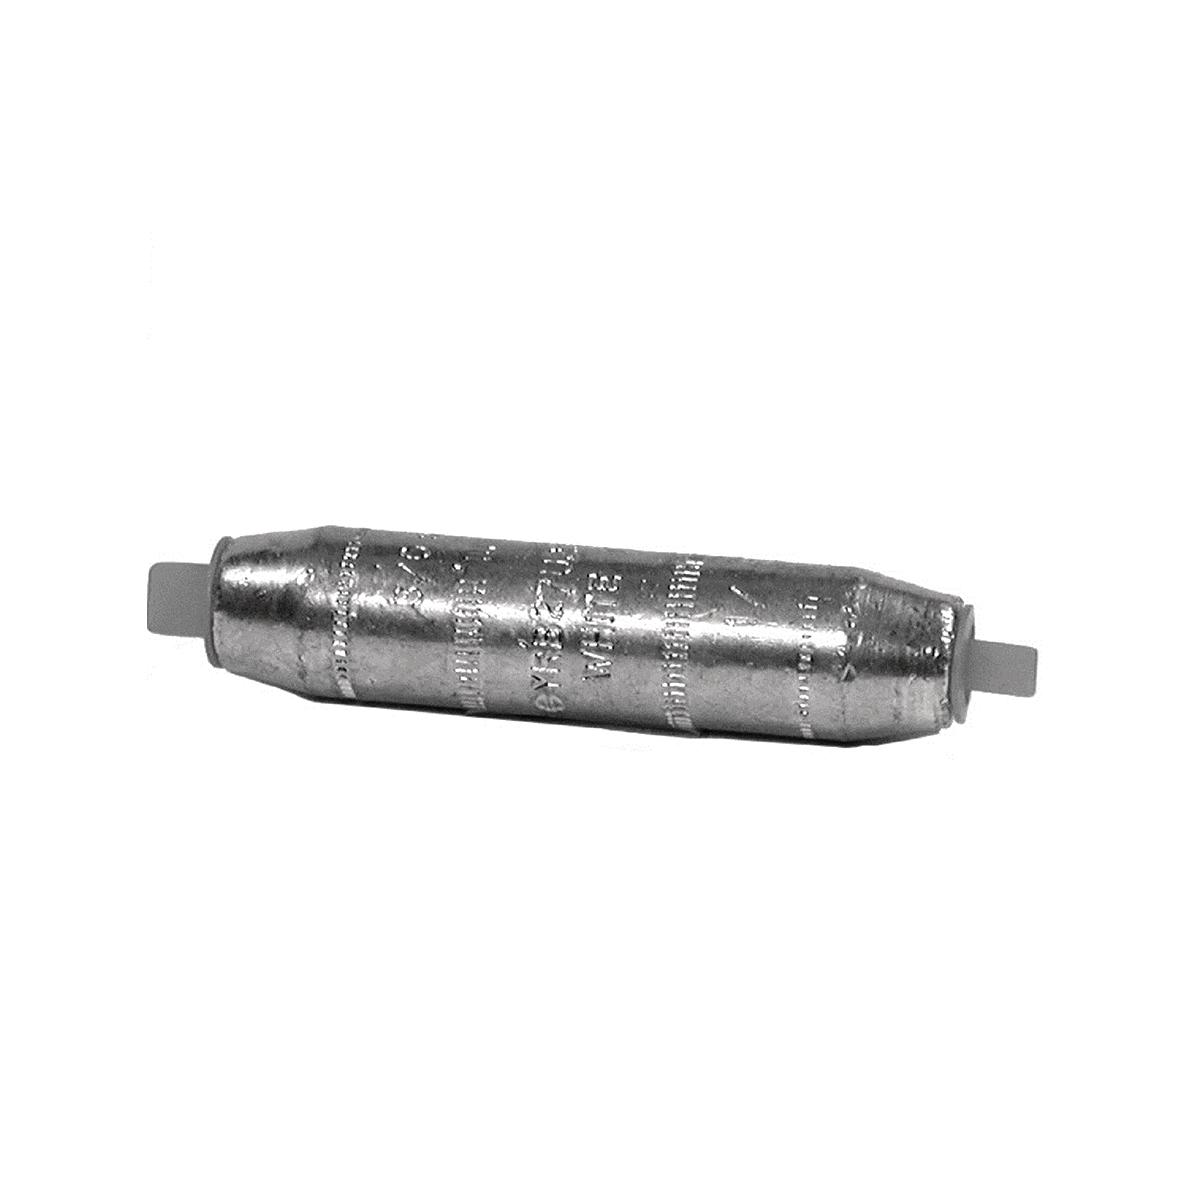 Hubbell YRB39U32 Aluminum Electro tin plated reducer. 